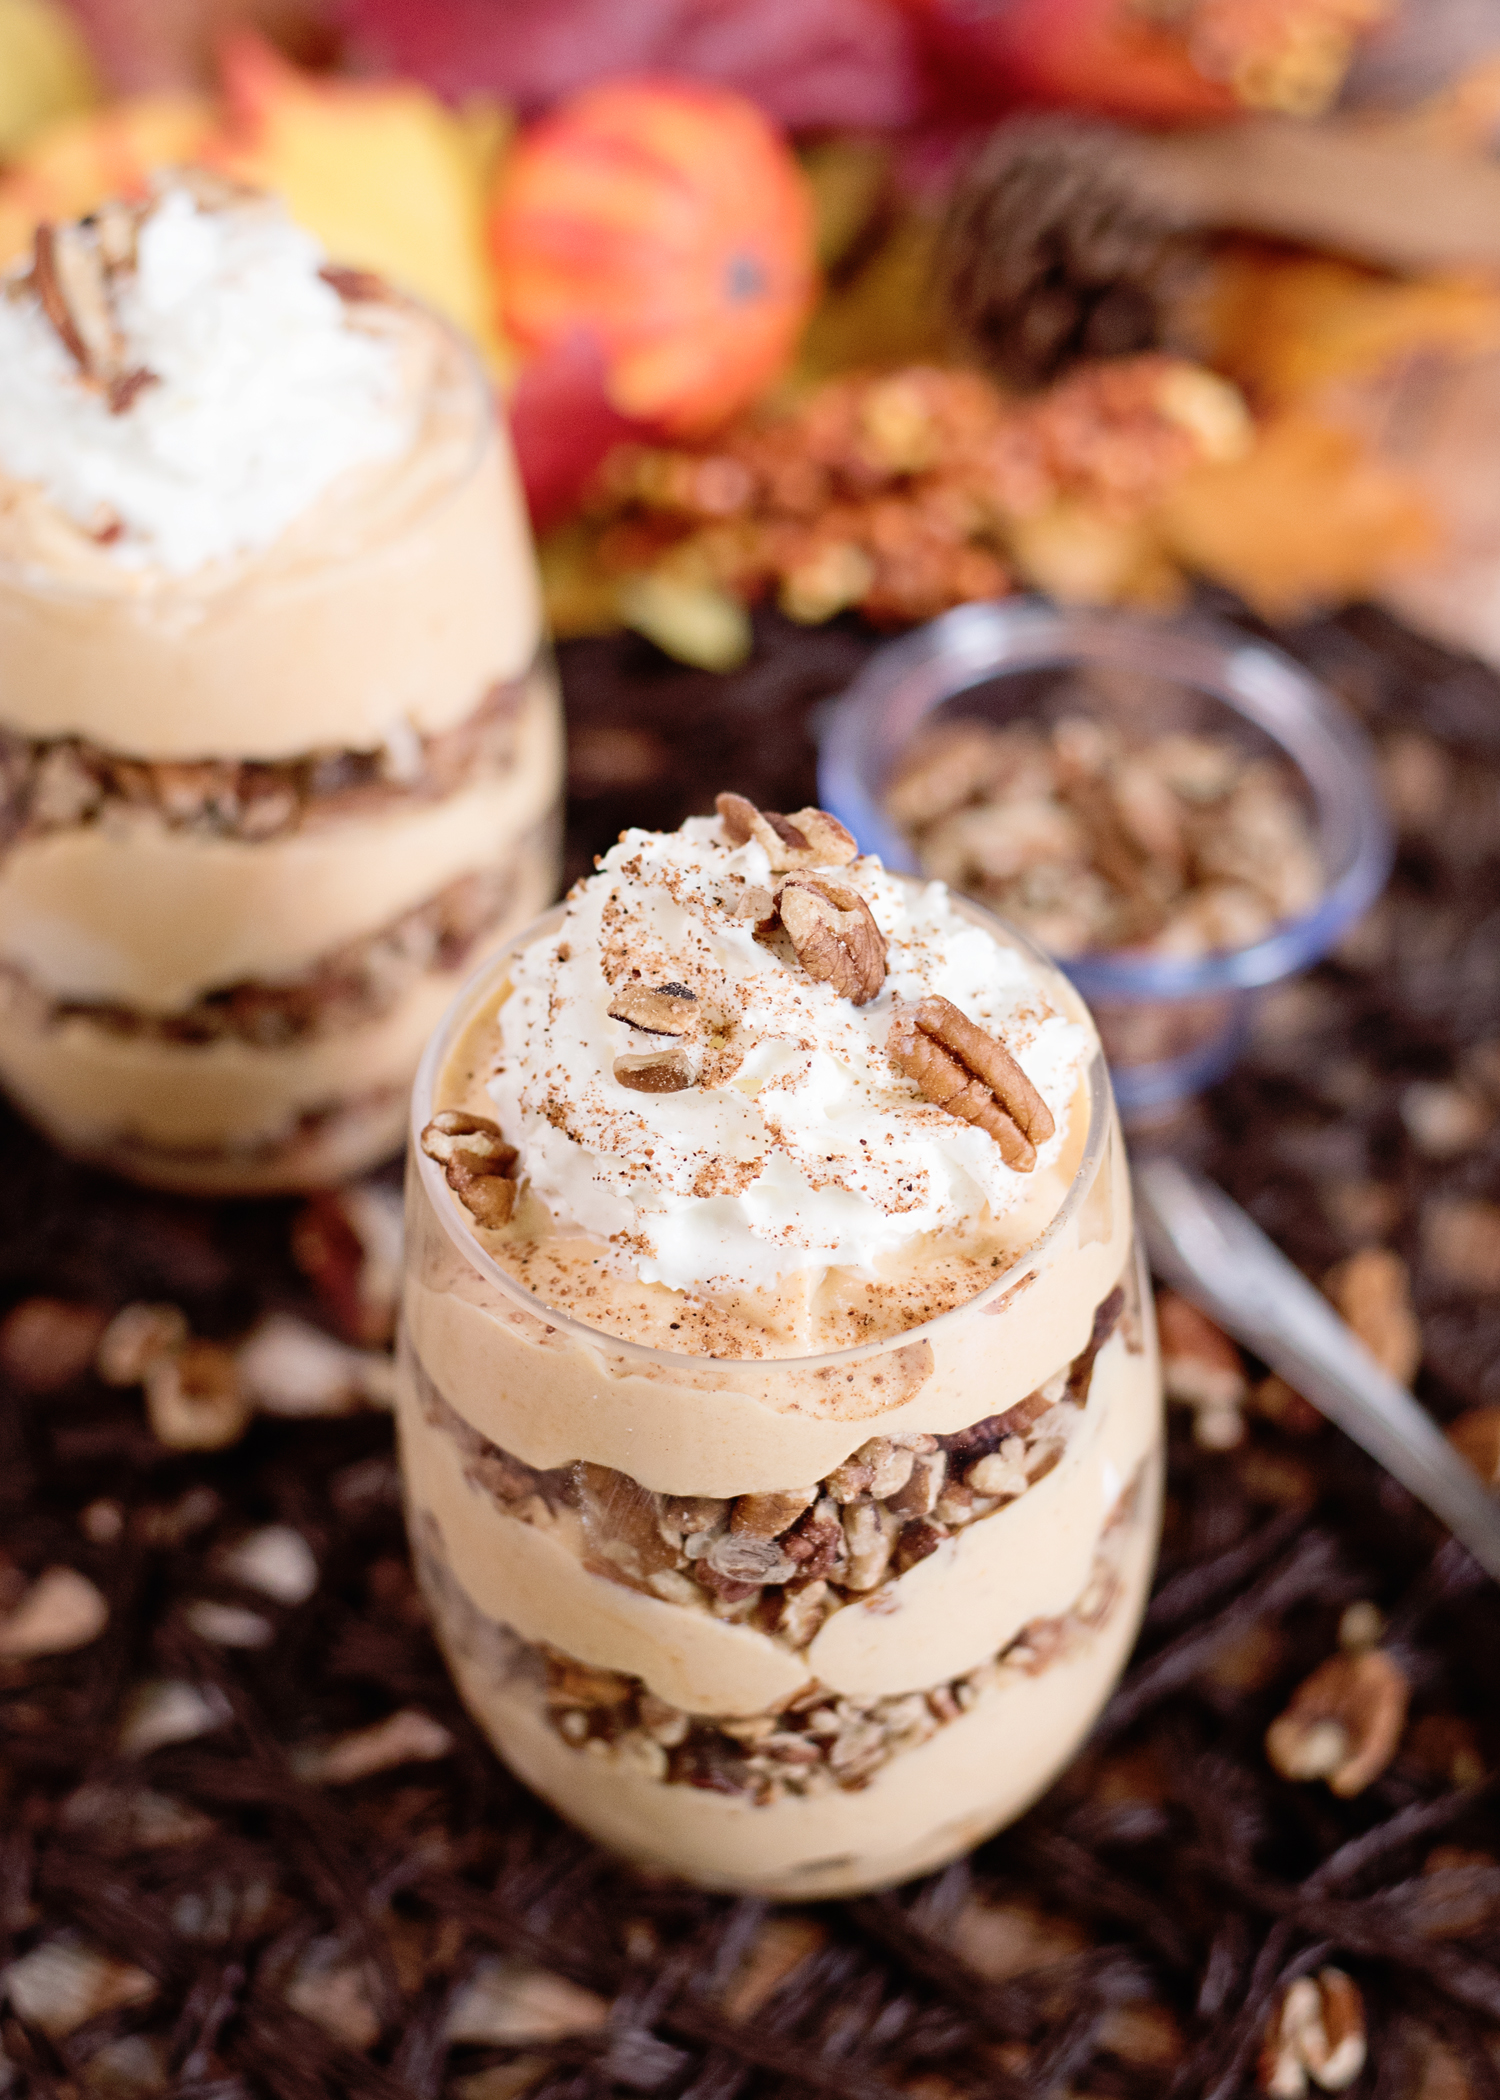 Get Your Fall On With This Pumpkin Spice Greek Yogurt Parfait